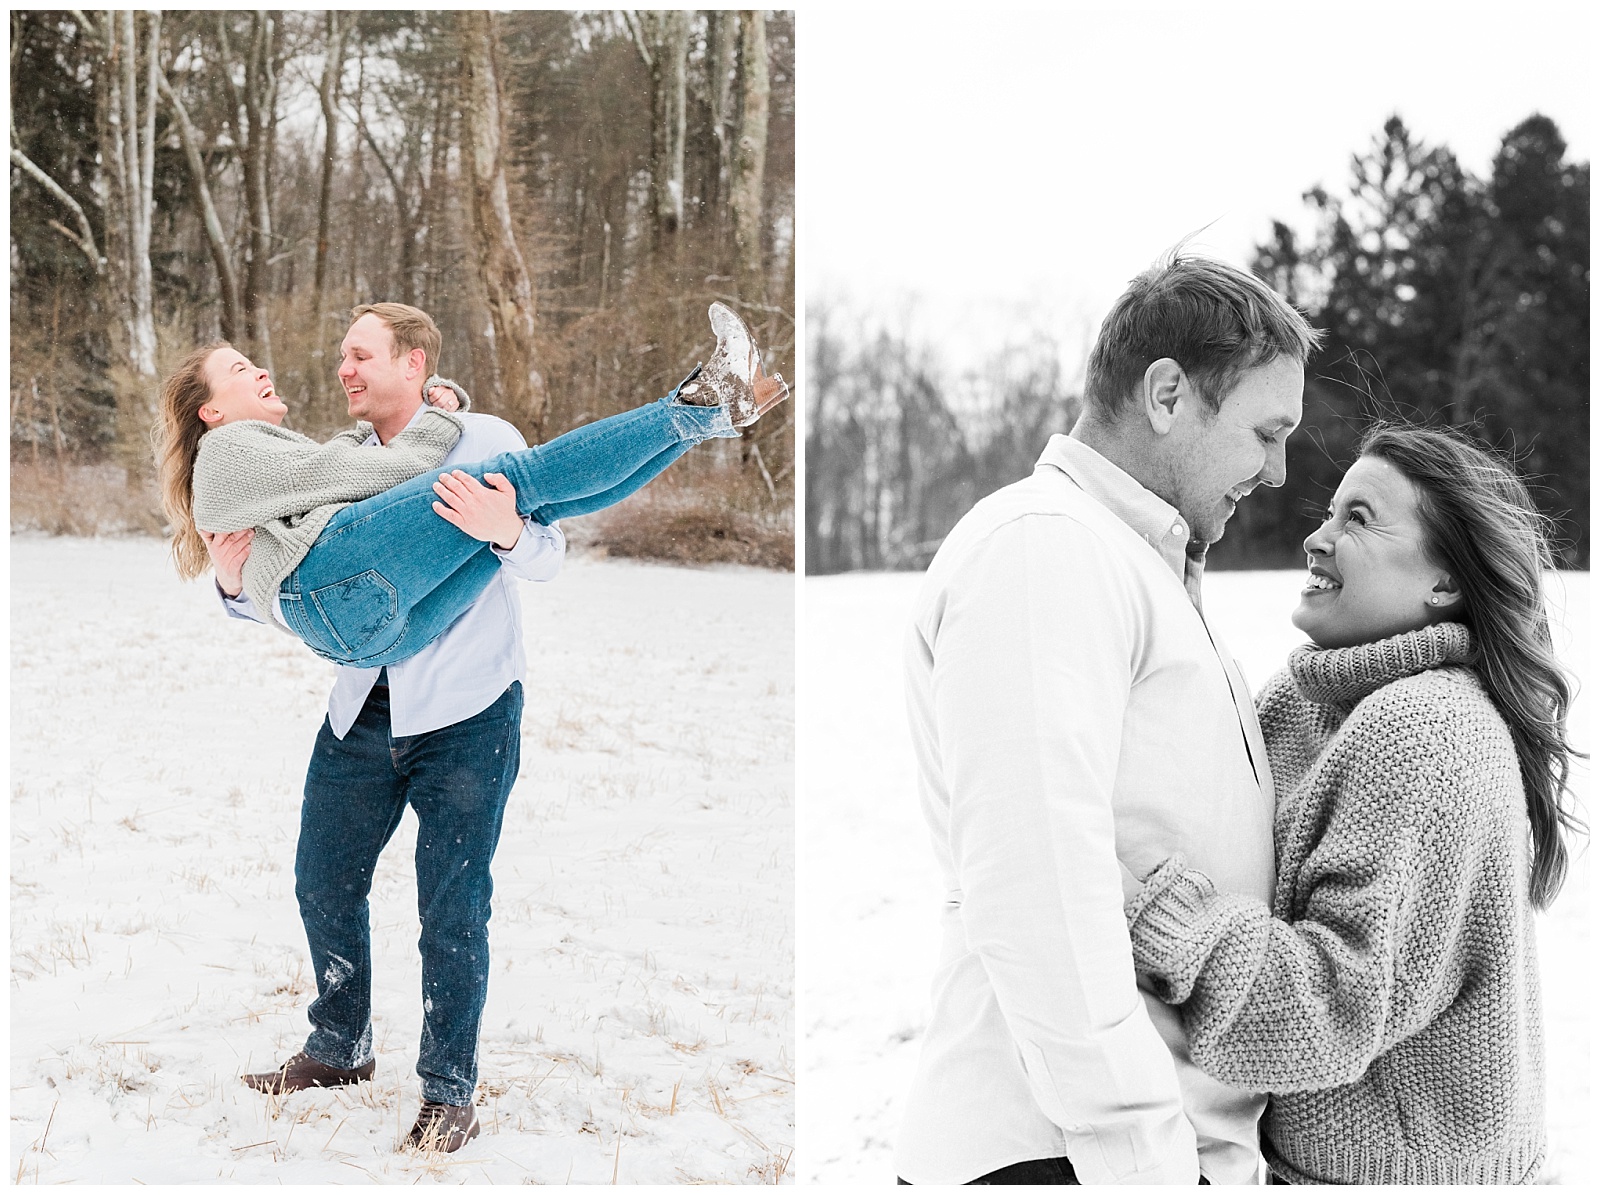 New Jersey Engagement Session, Snowy, Winter, Cozy, Session, Wedding Photographer, Cross Estate Gardens, Snow, Wintry, Light and Airy, Laughter